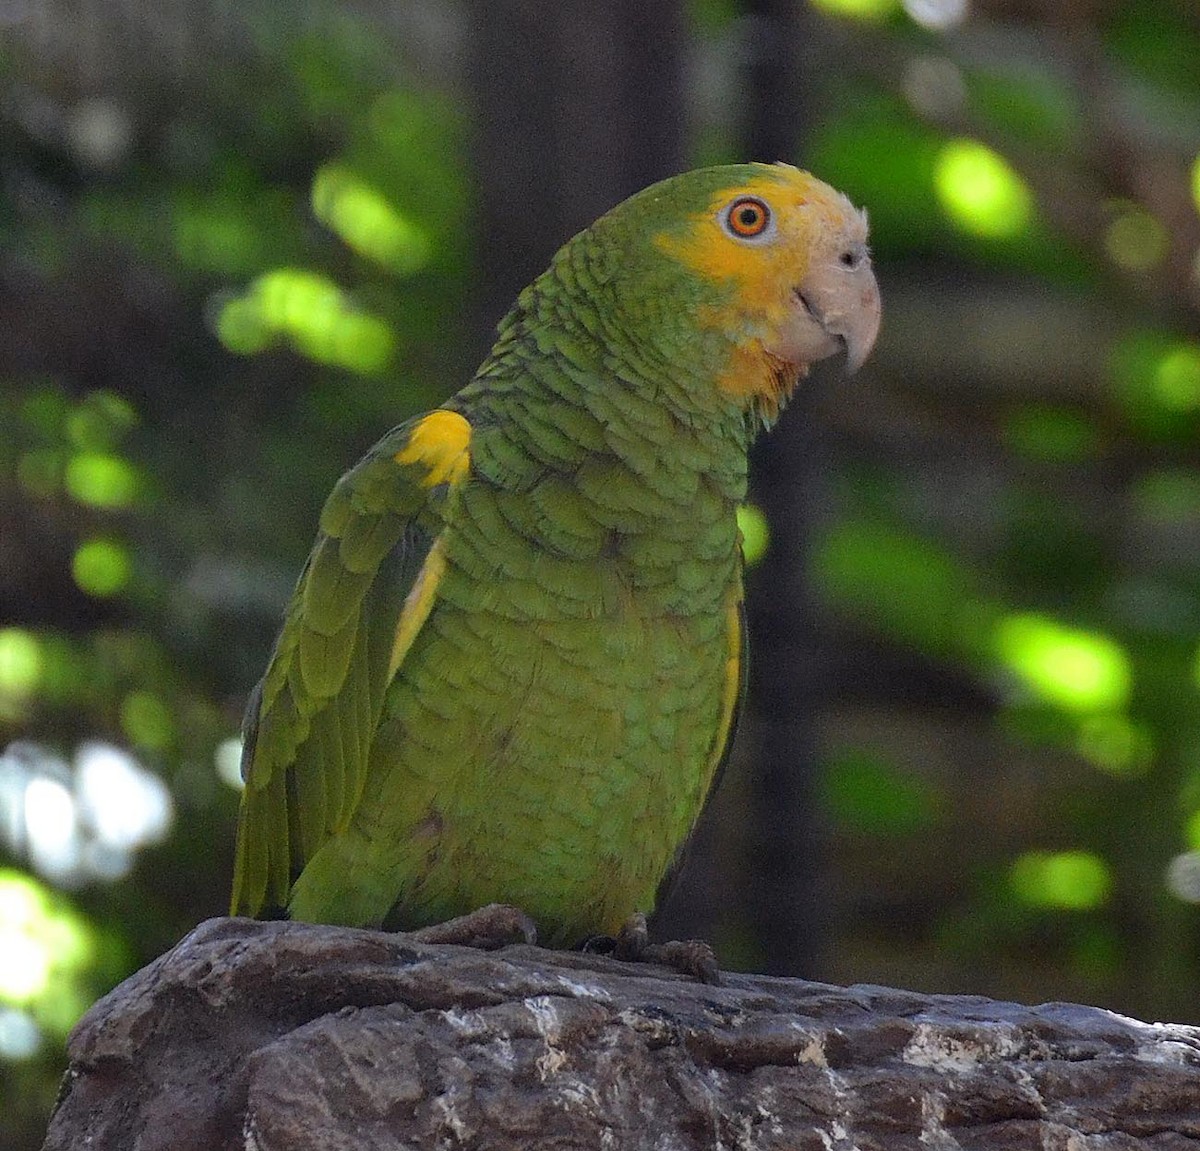 Yellow-shouldered Parrot - A Emmerson